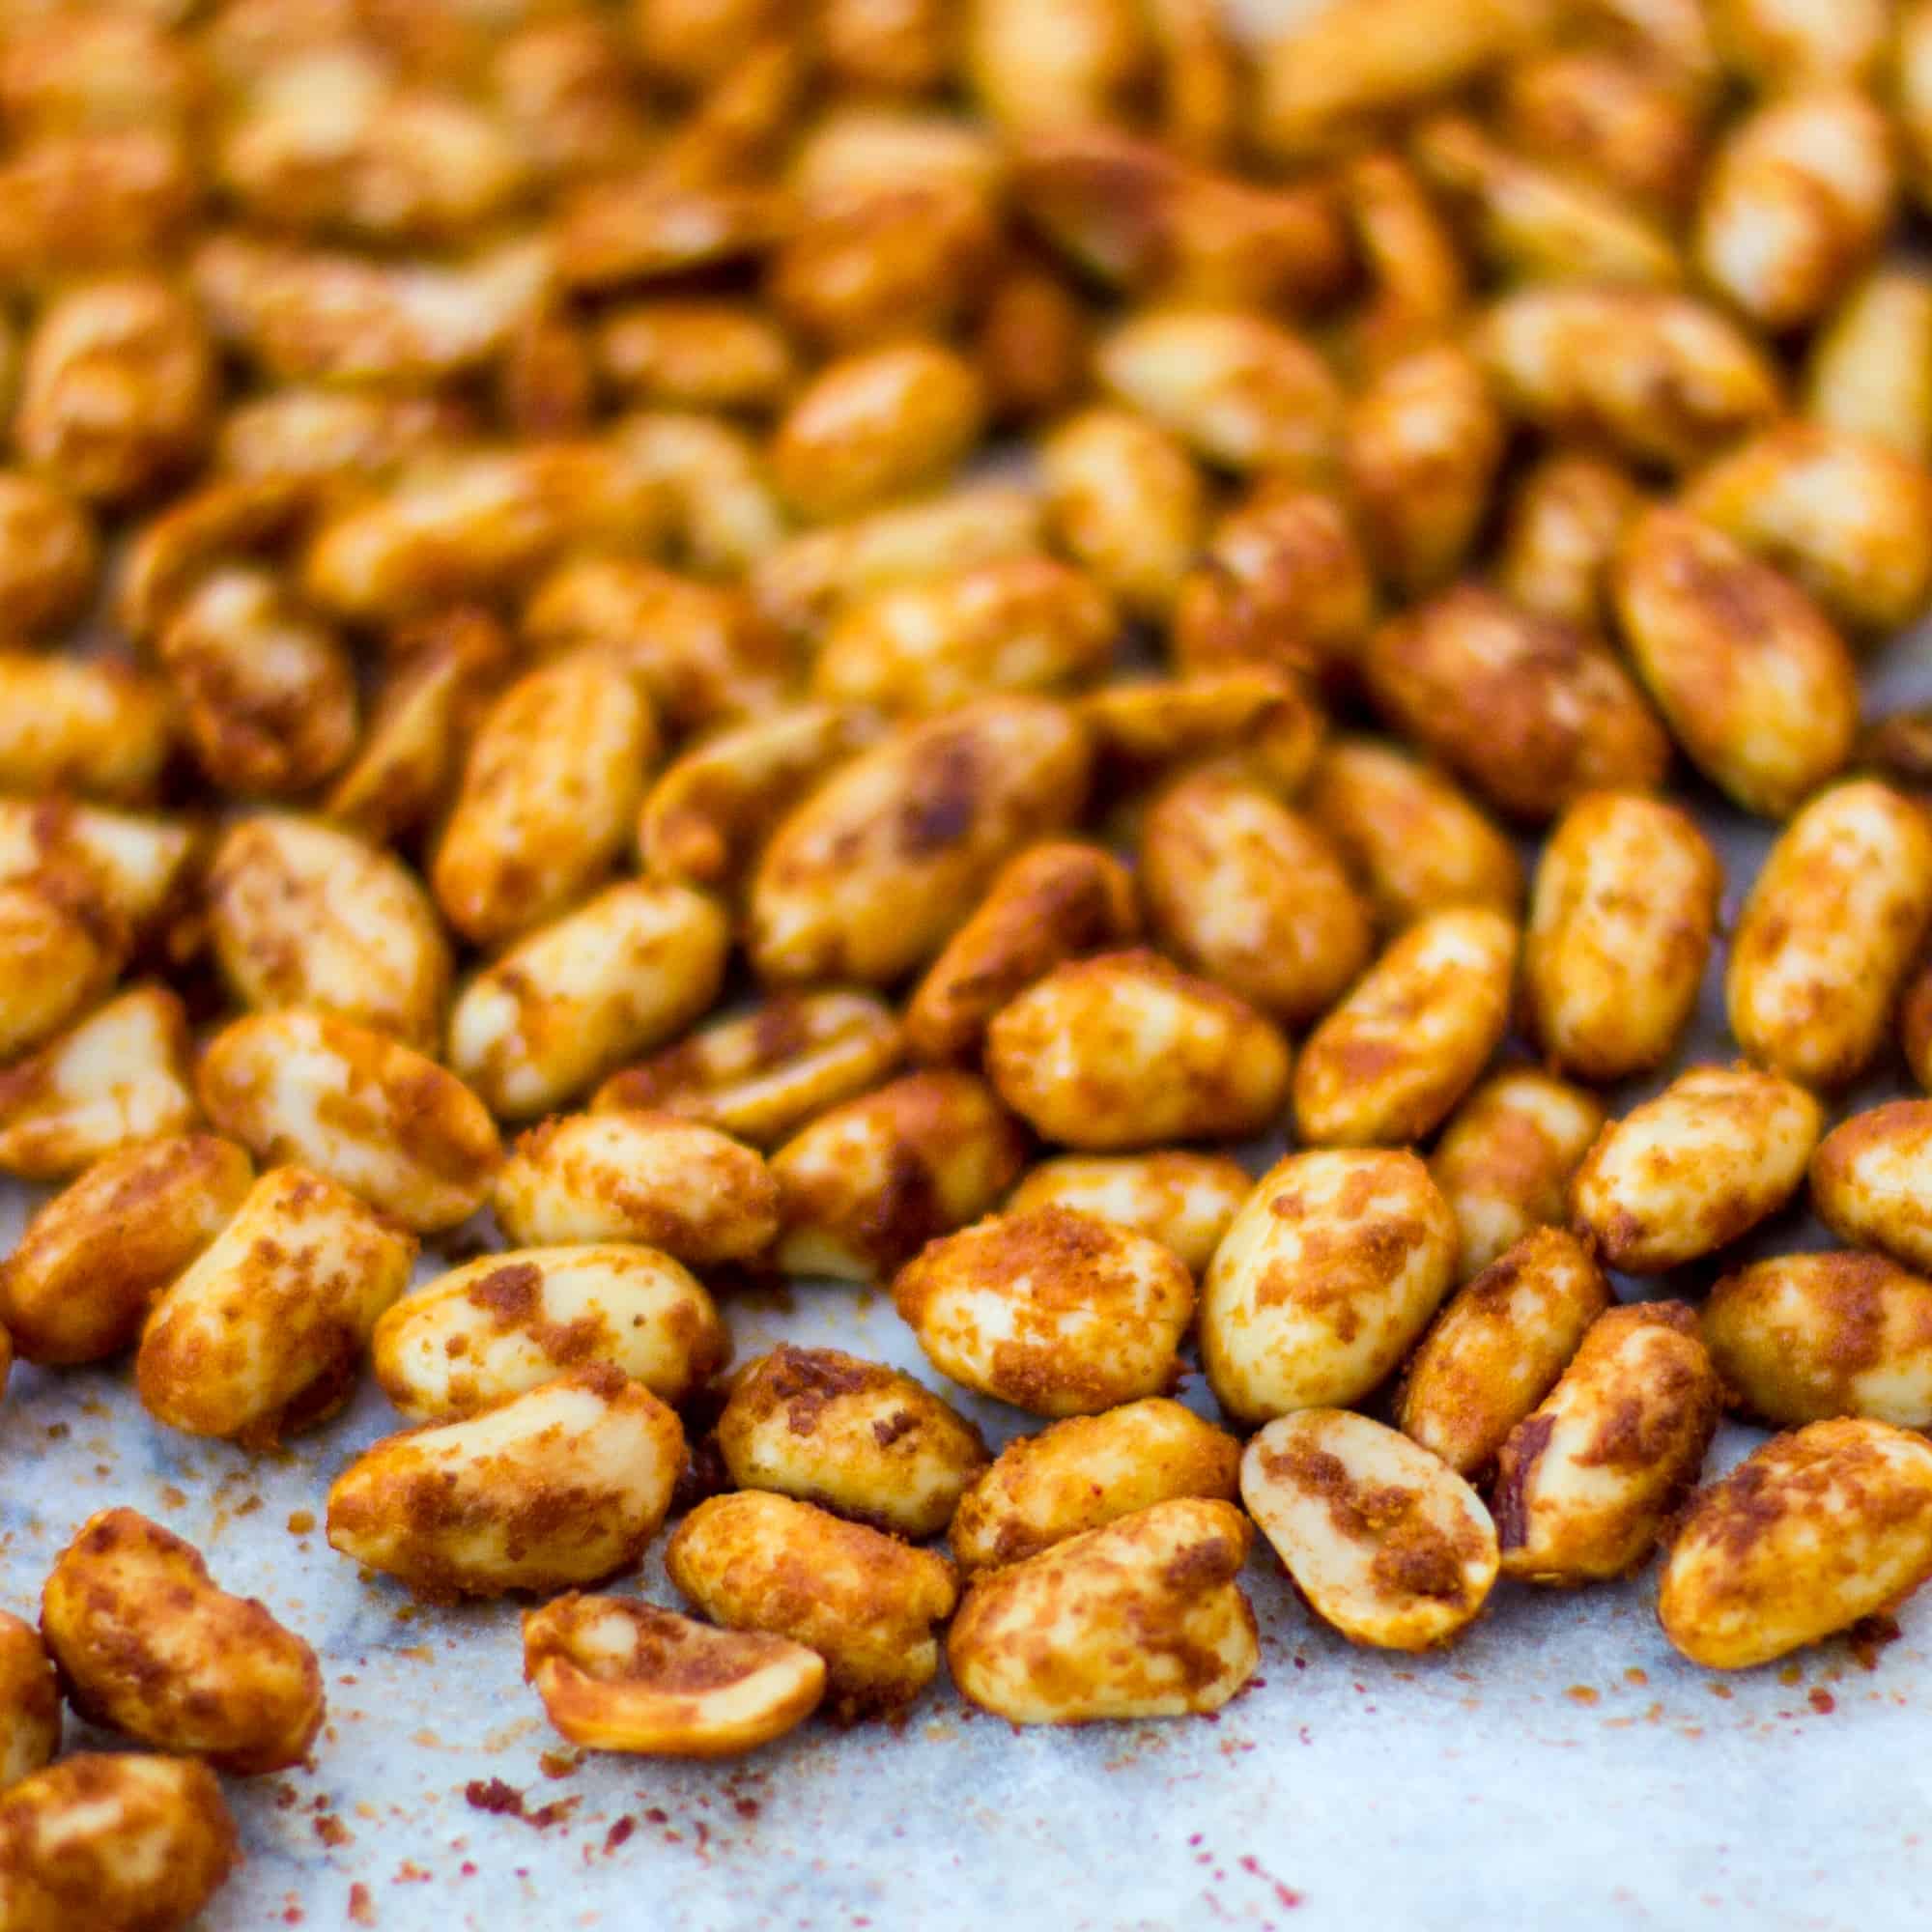 Close up picture of roasted nuts.